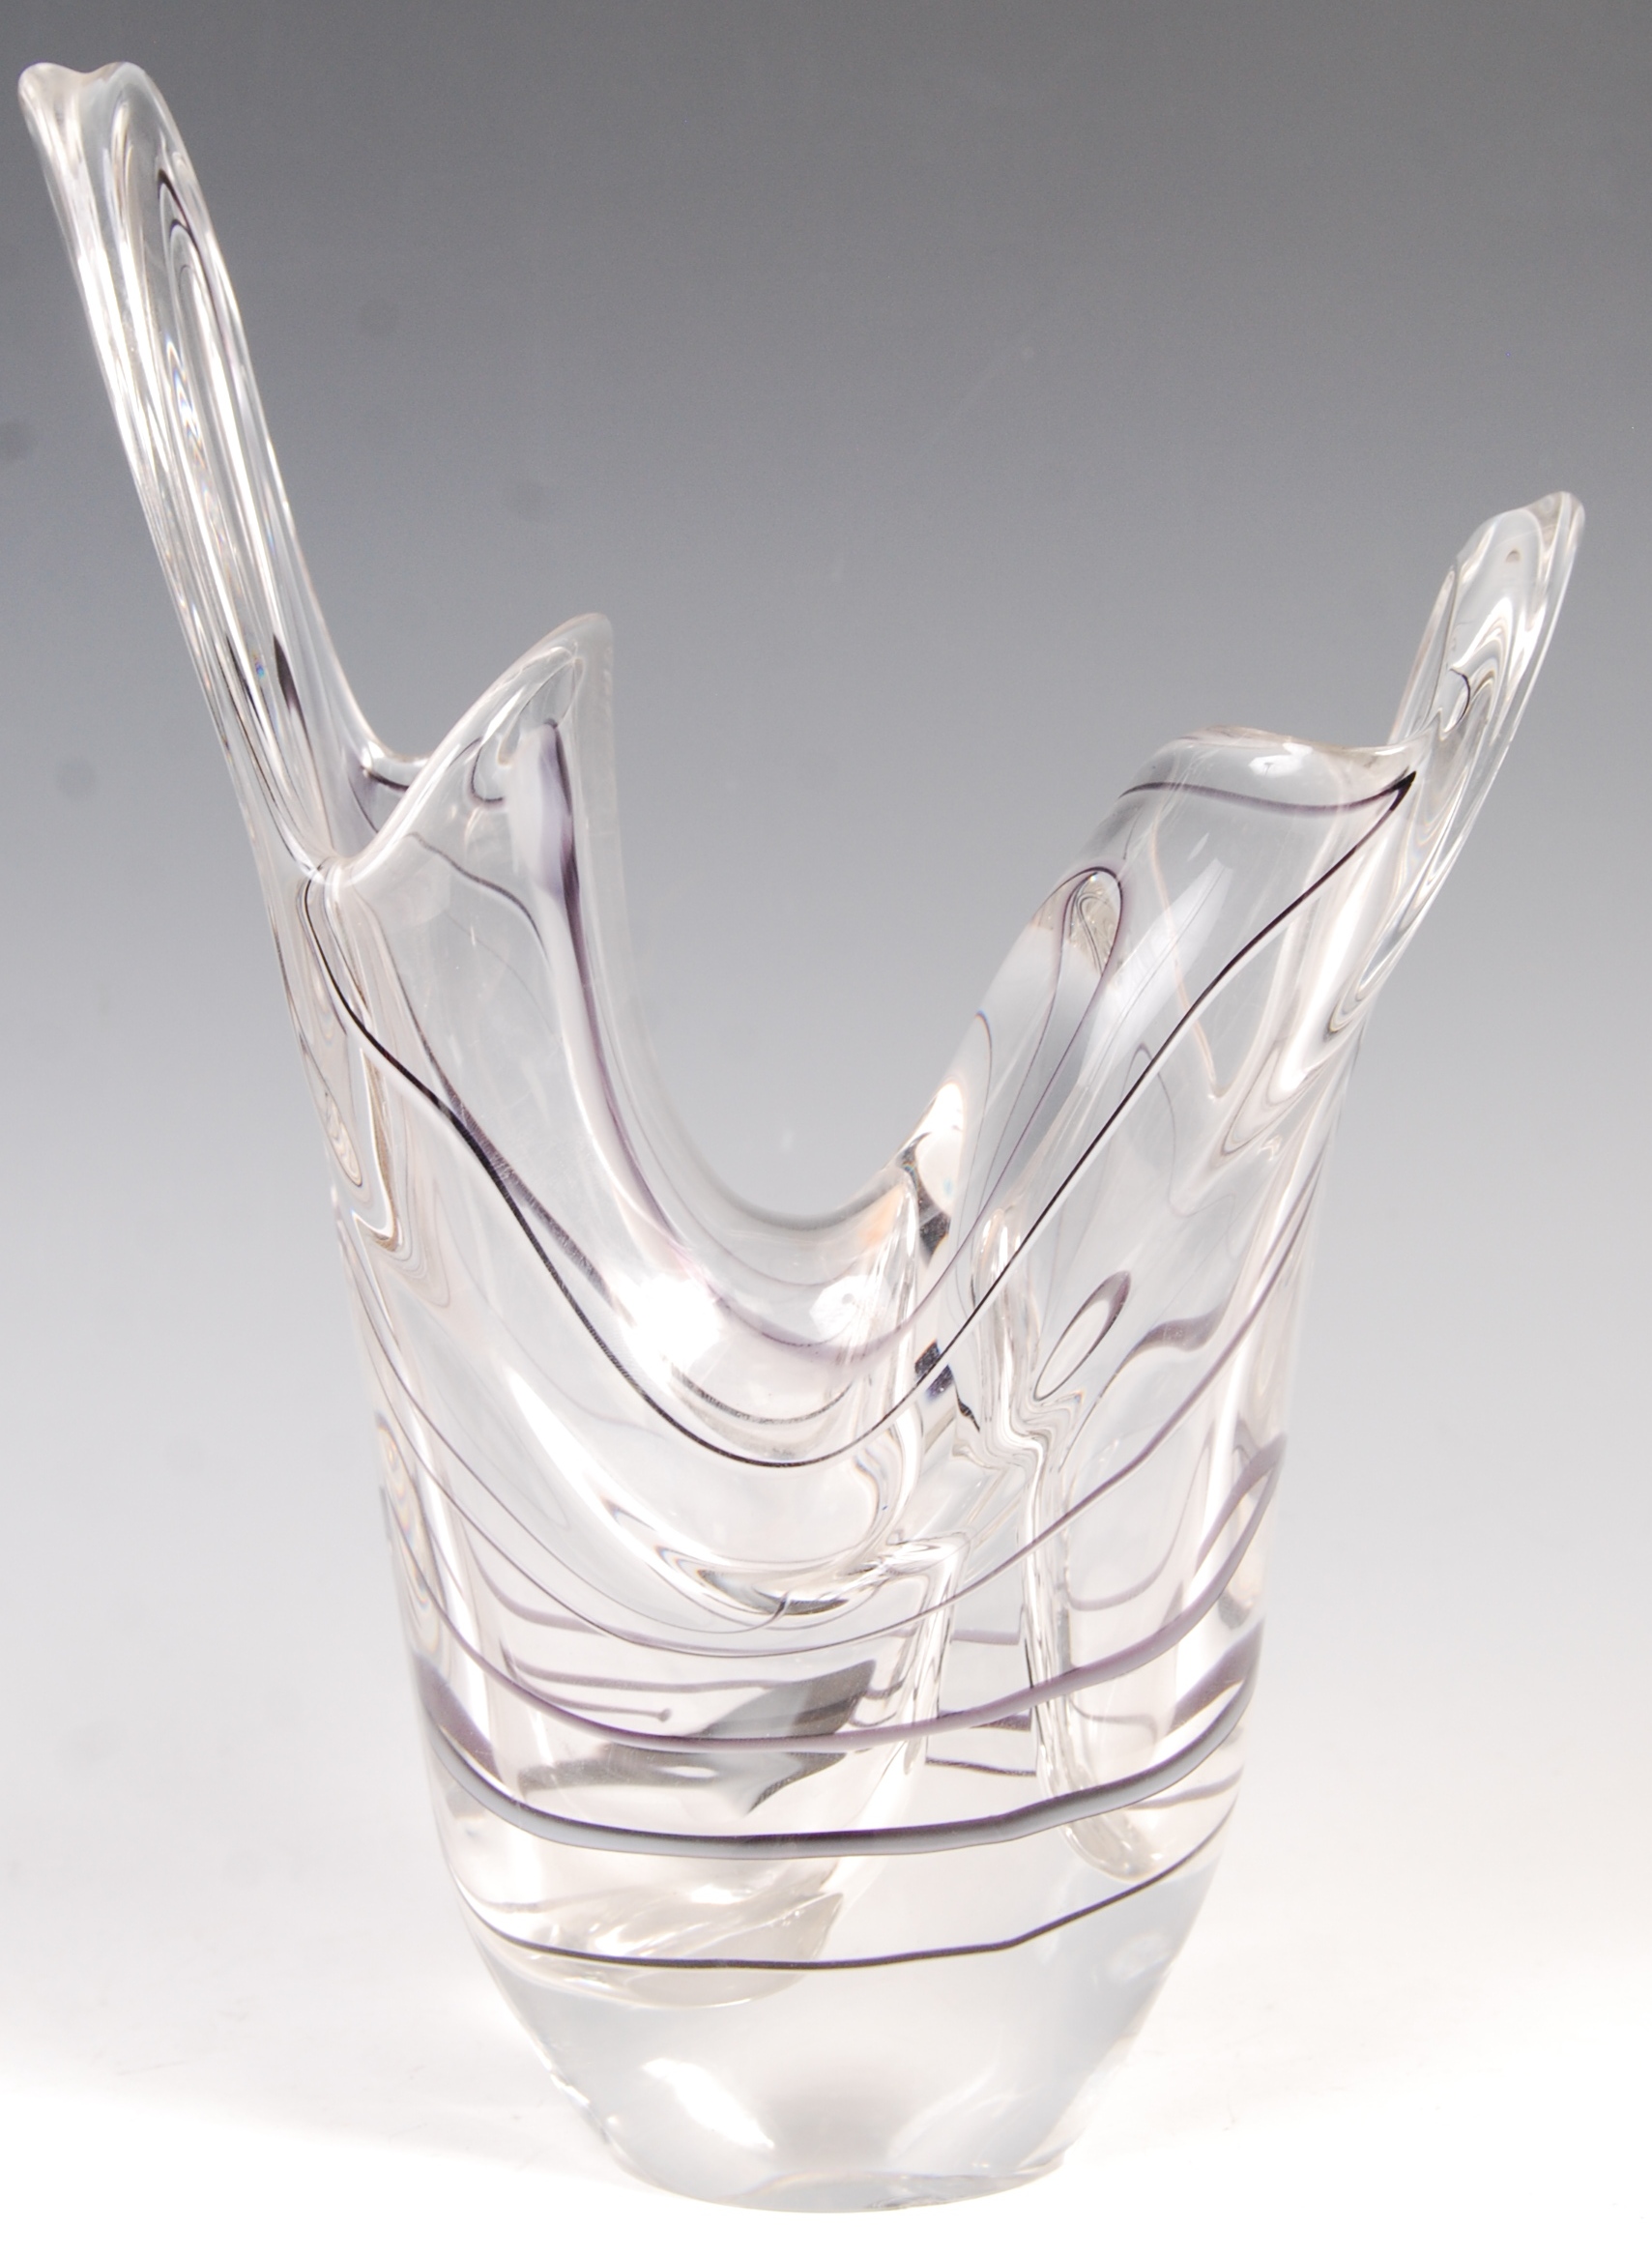 WEISBACH LATE 20TH CENTURY STUDIO ART GLASS POSSIBLY BY D. GARCIA - Image 2 of 6